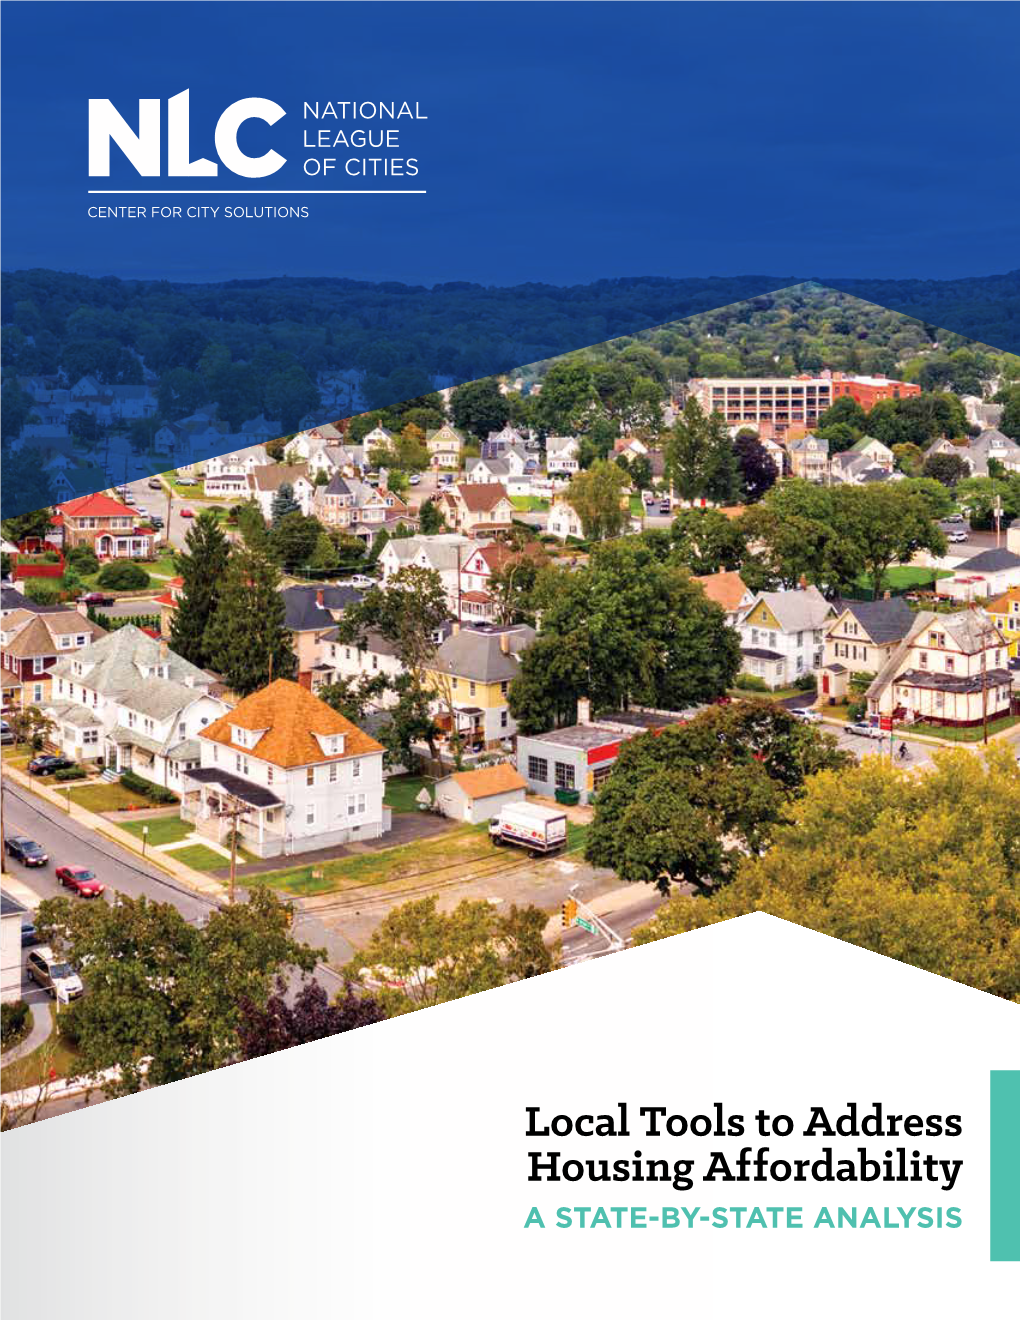 Local Tools to Address Housing Affordability a STATE-BY-STATE ANALYSIS NATIONAL LEAGUE of CITIES